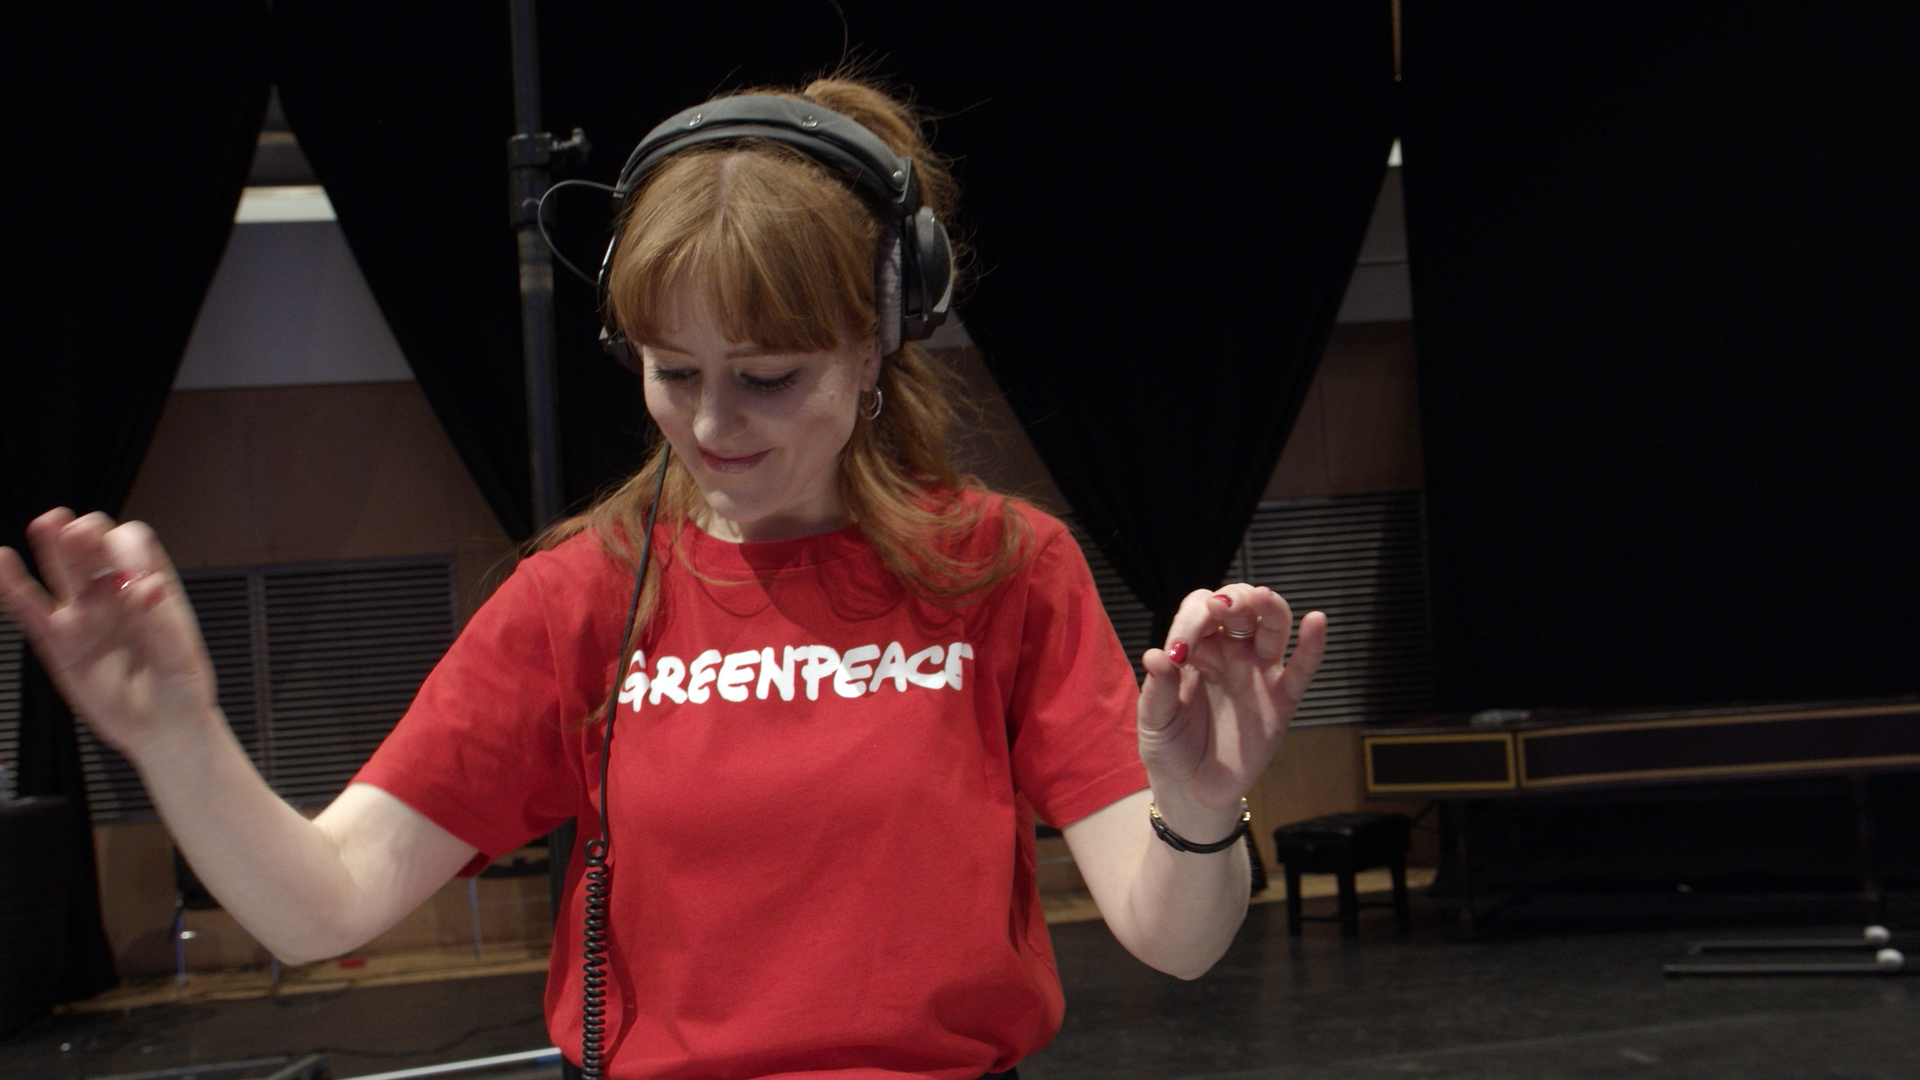 A conductor wearing headphones and a red Greenpeace tshirt looks down and smiles as she conducts an Orchestra